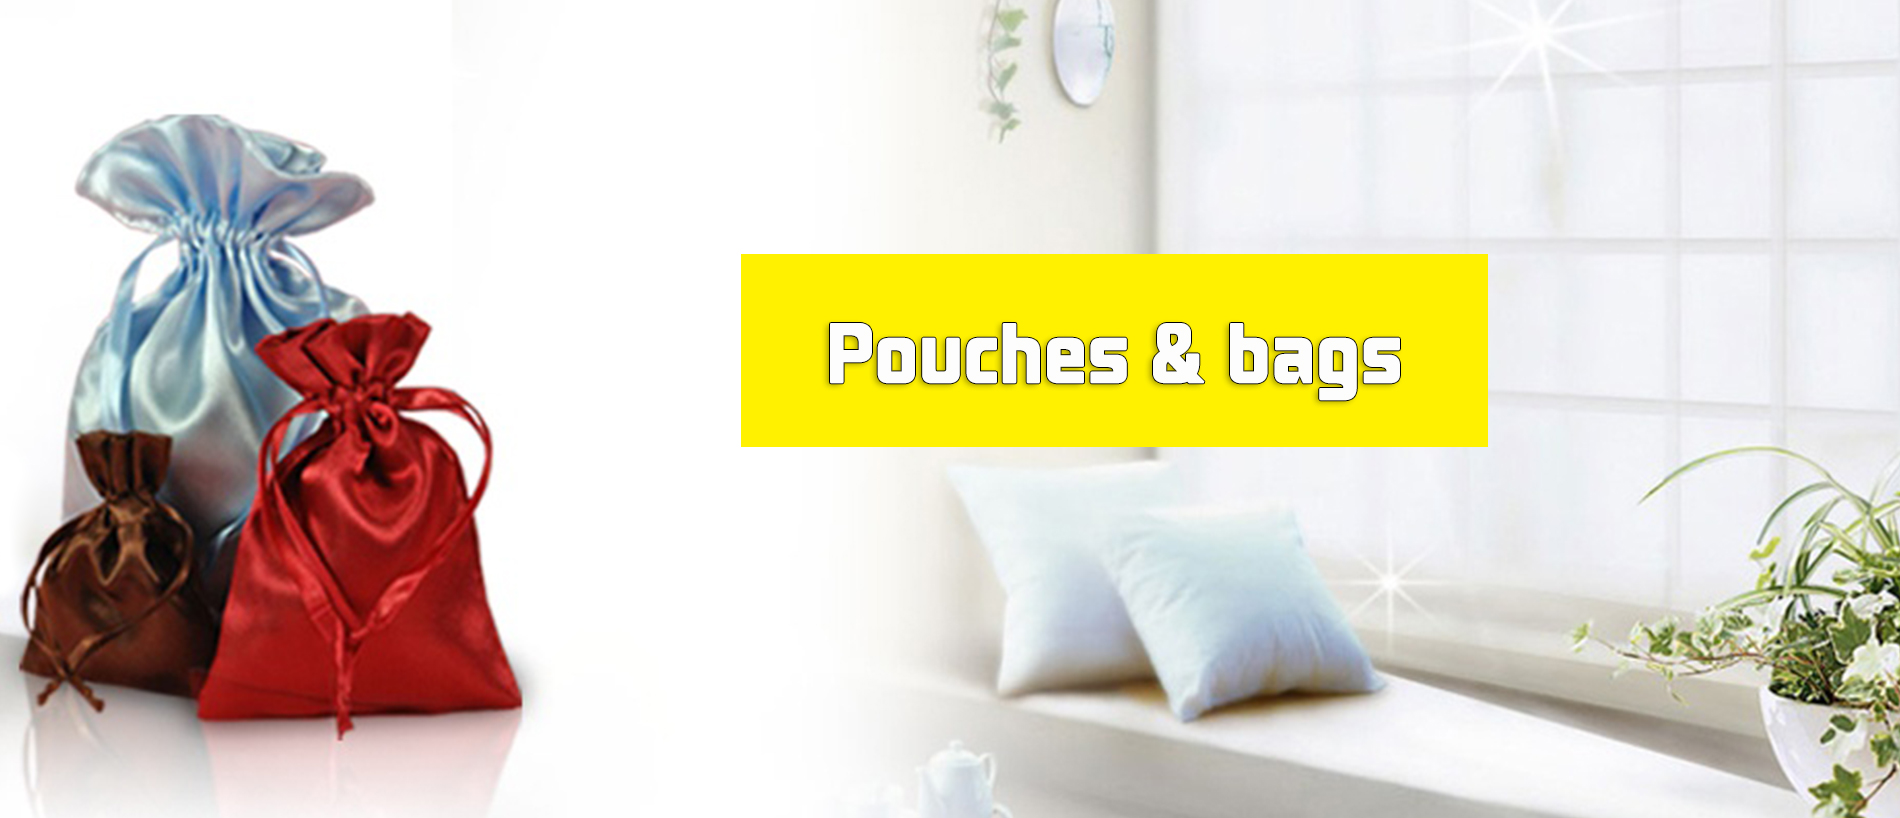 pouches bags 1